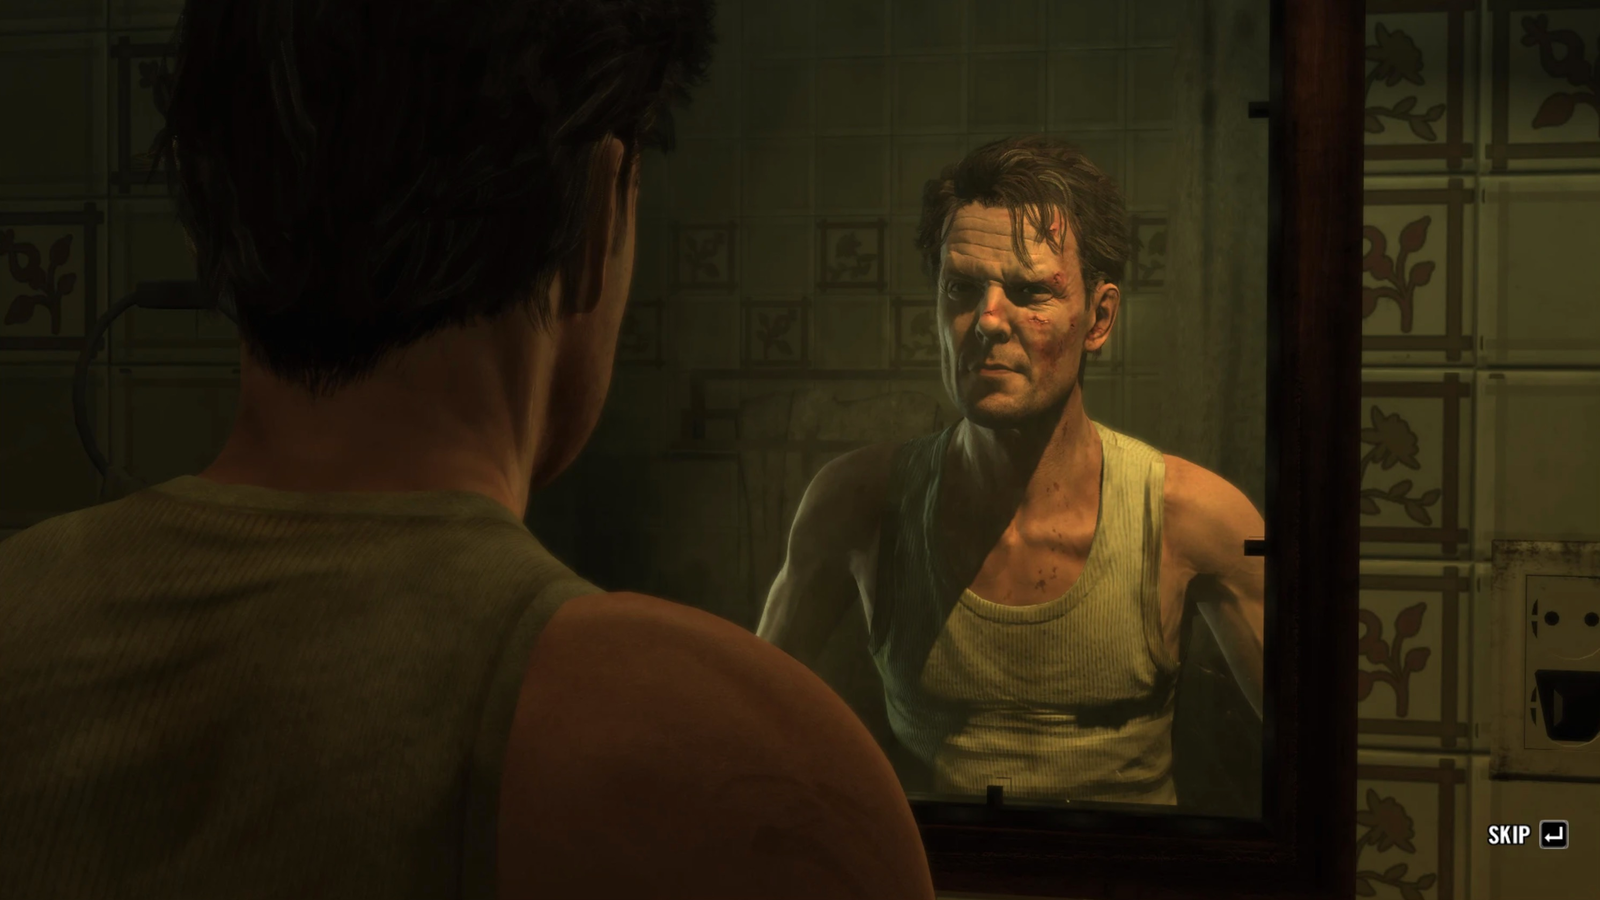 Max Payne (Mobile) Review –